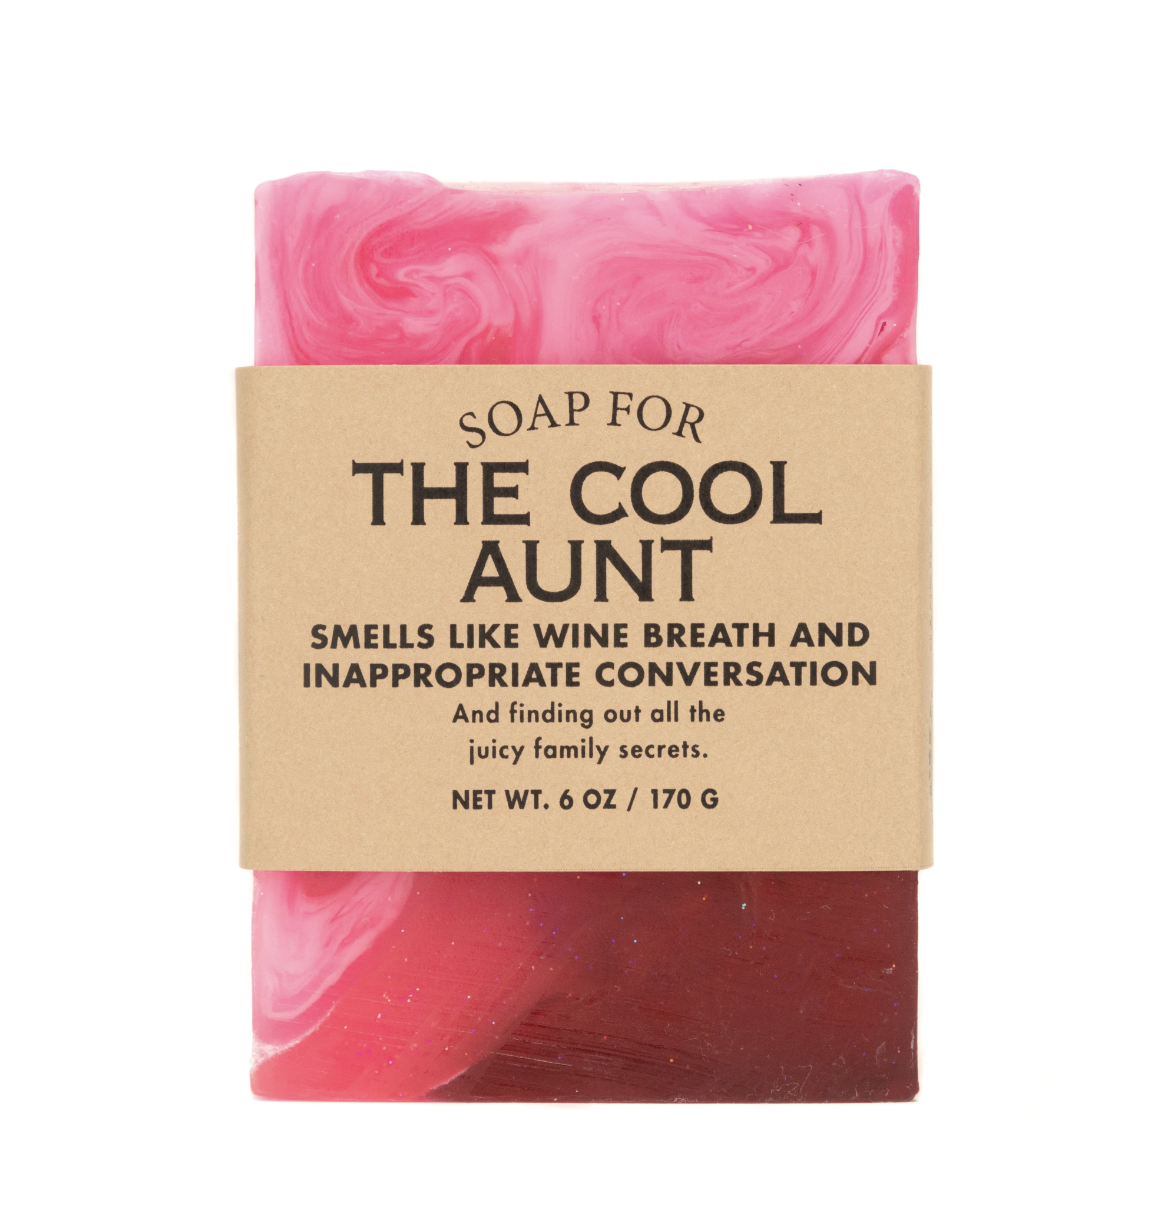 A Soap for the Cool Aunt